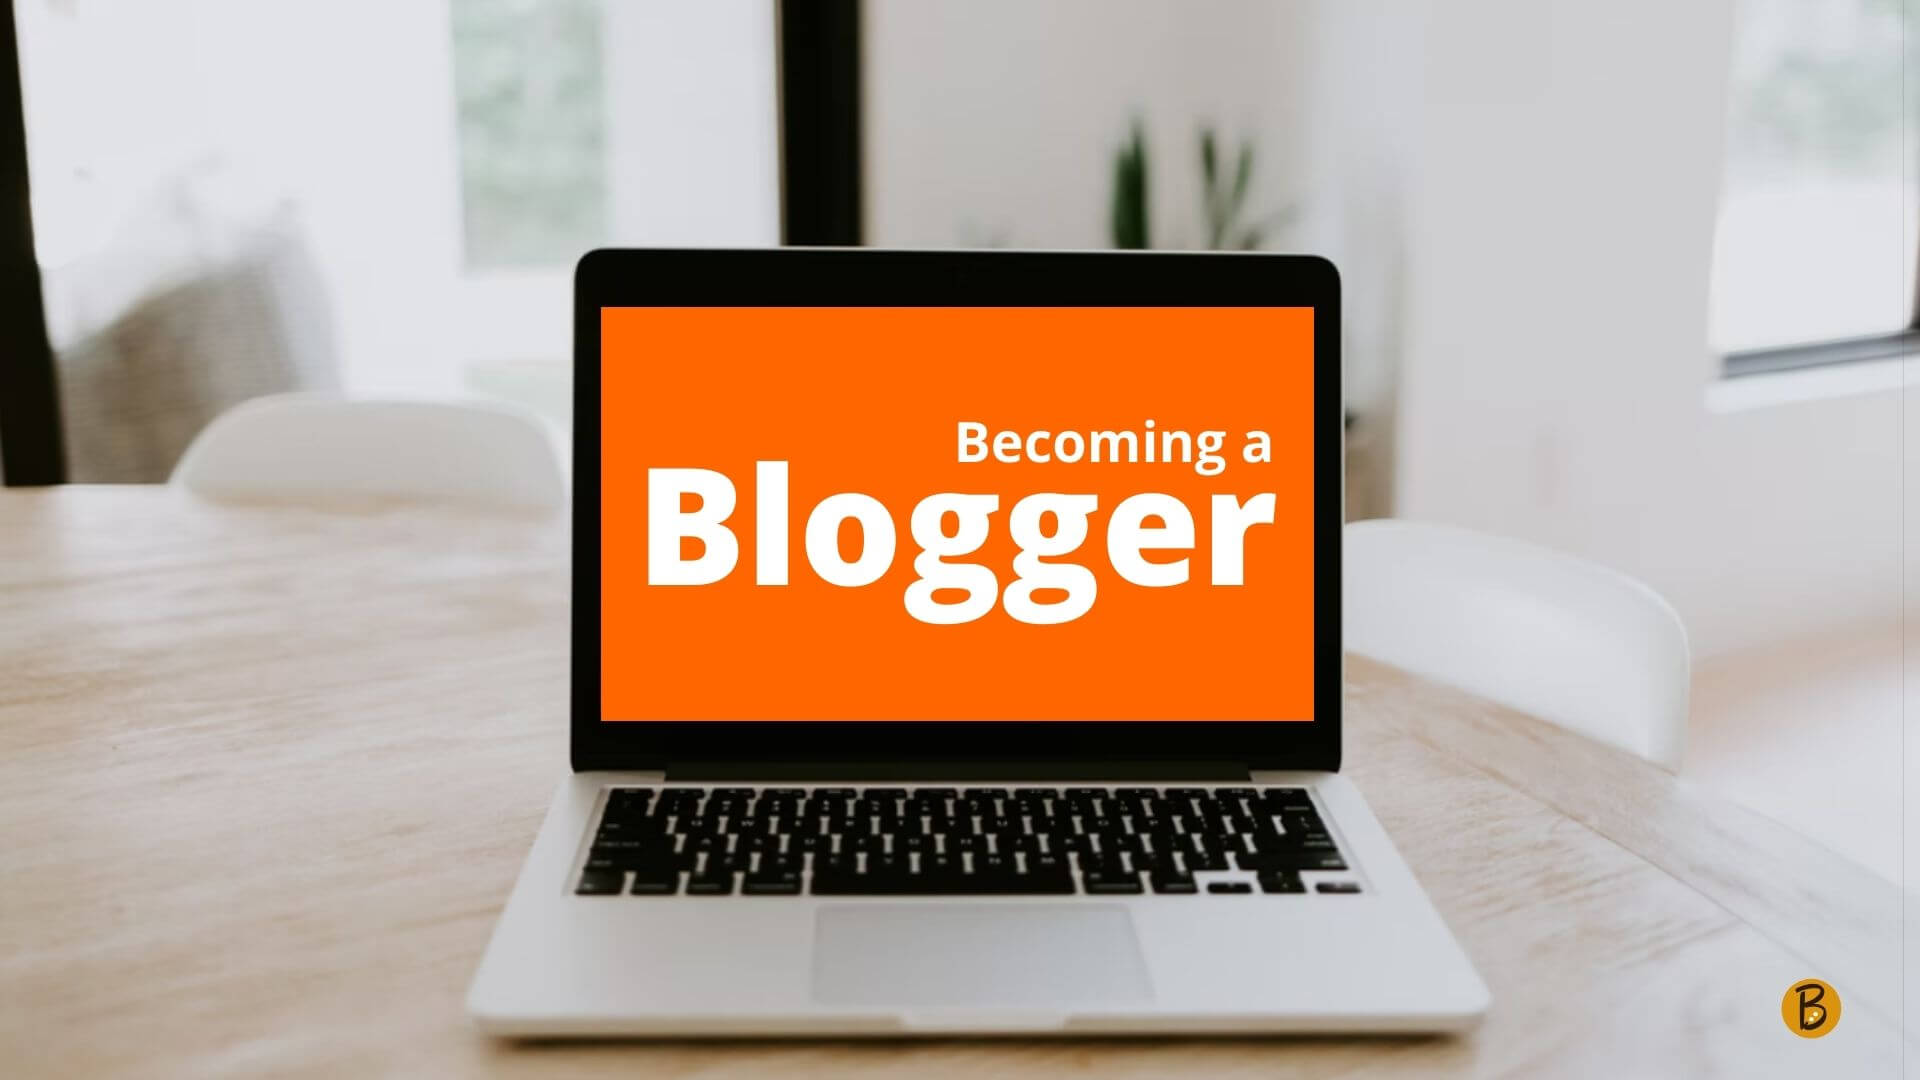 How to Become a Blogger that earns good money